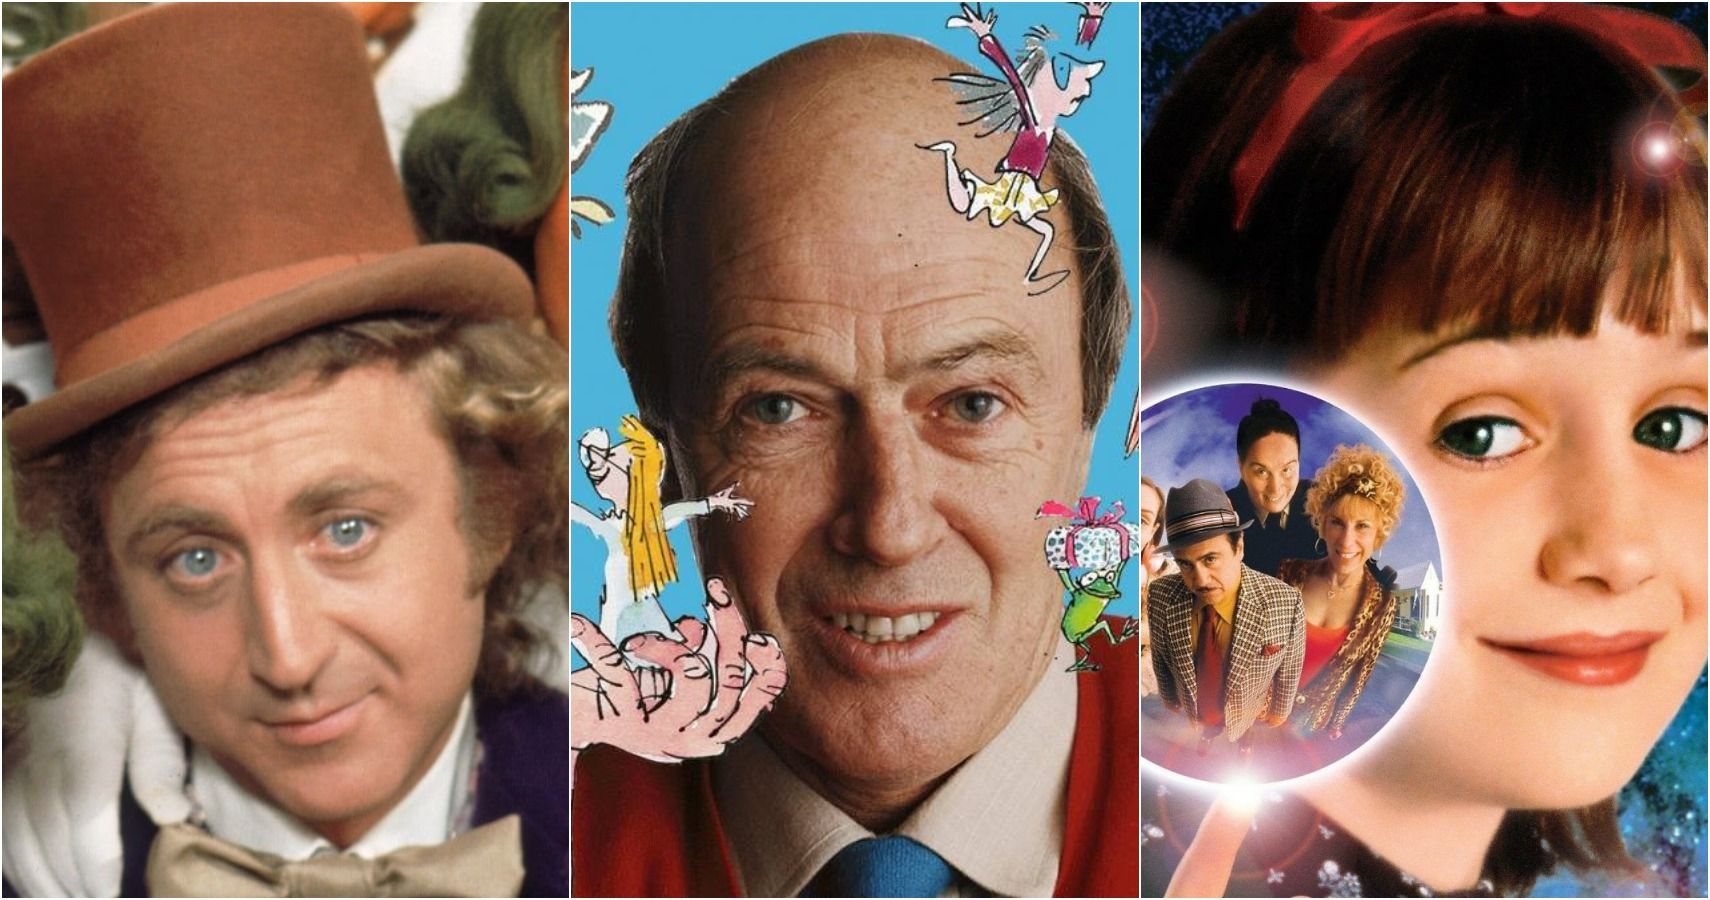 Top 10 Movies Based on Roald Dahl’s Books (According to Rotten Tomatoes)